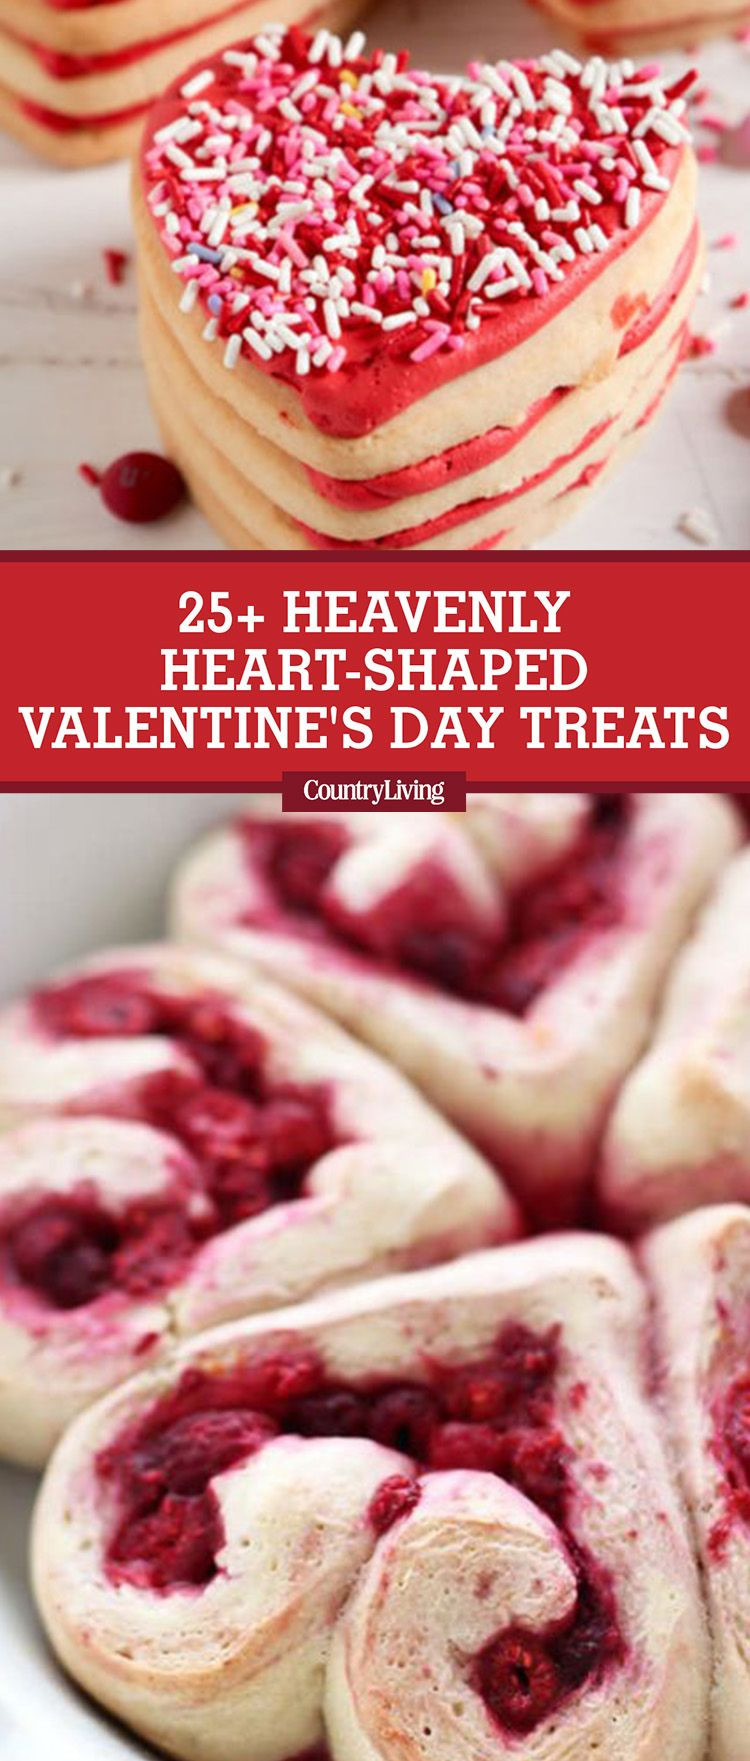 13 Cute Valentine Vase Fillers 2024 free download valentine vase fillers of 27 heavenly heart shaped valentines day recipes valentines day with regard to these desserts will steal your heart on valentines day valentinesday valentinesdaydess